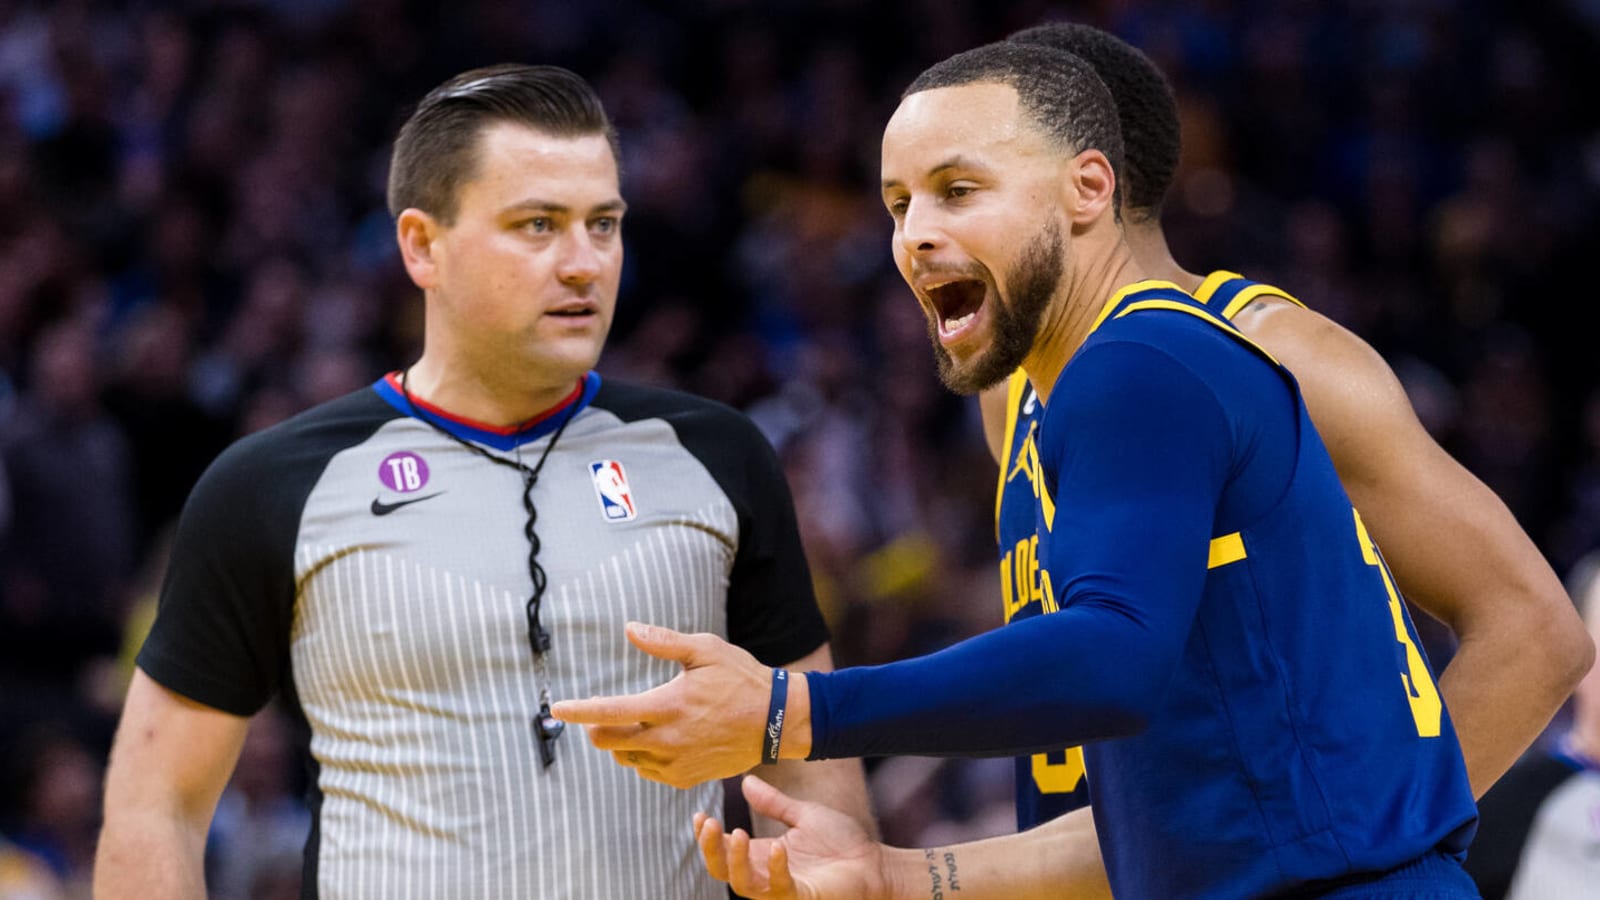 Stephen Curry ejected after throwing mouthpiece in frustration